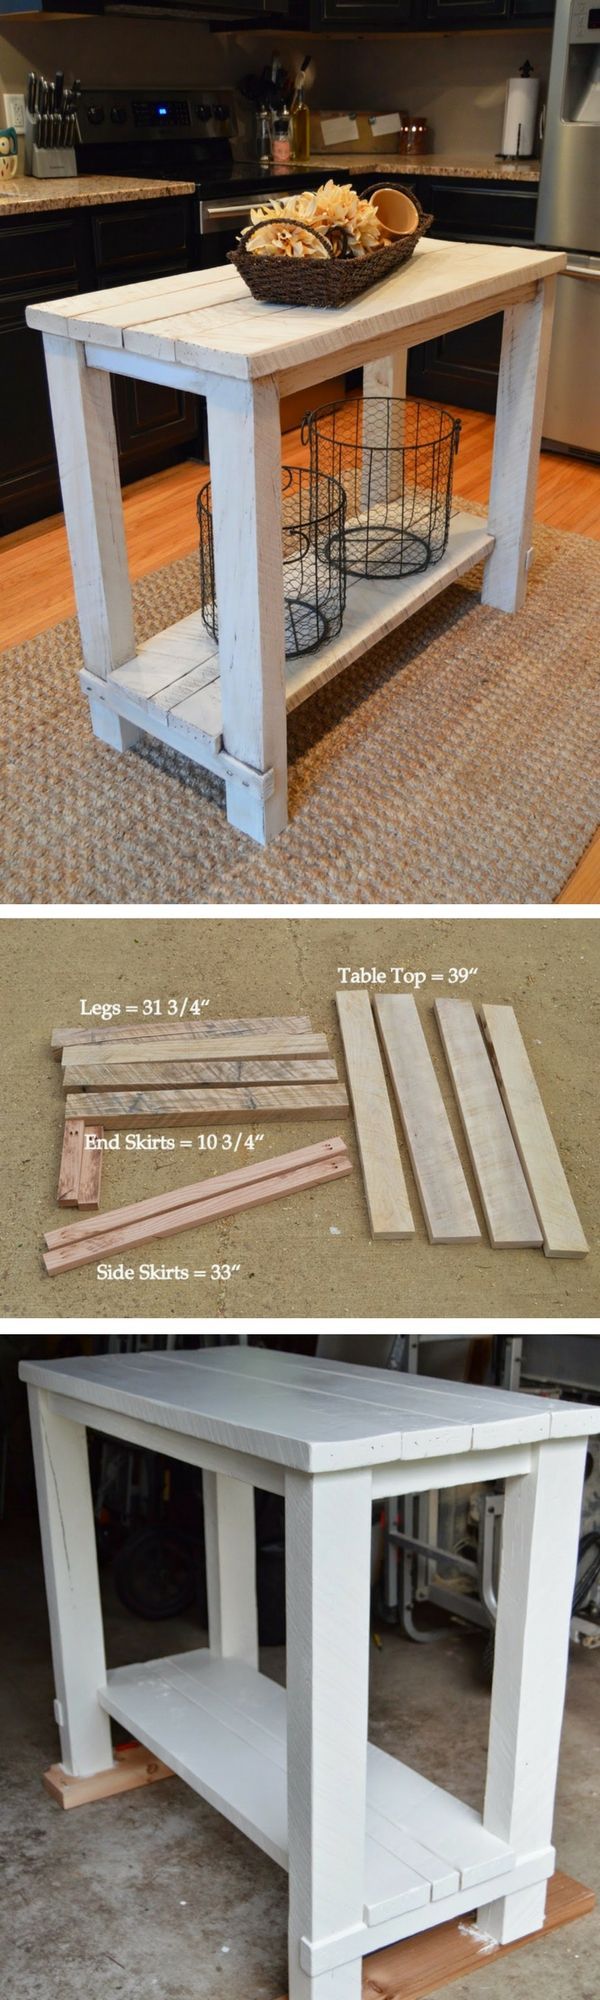 Check out the tutorial on how to build a DIY kitchen island from reclaimed wood @istandarddesign